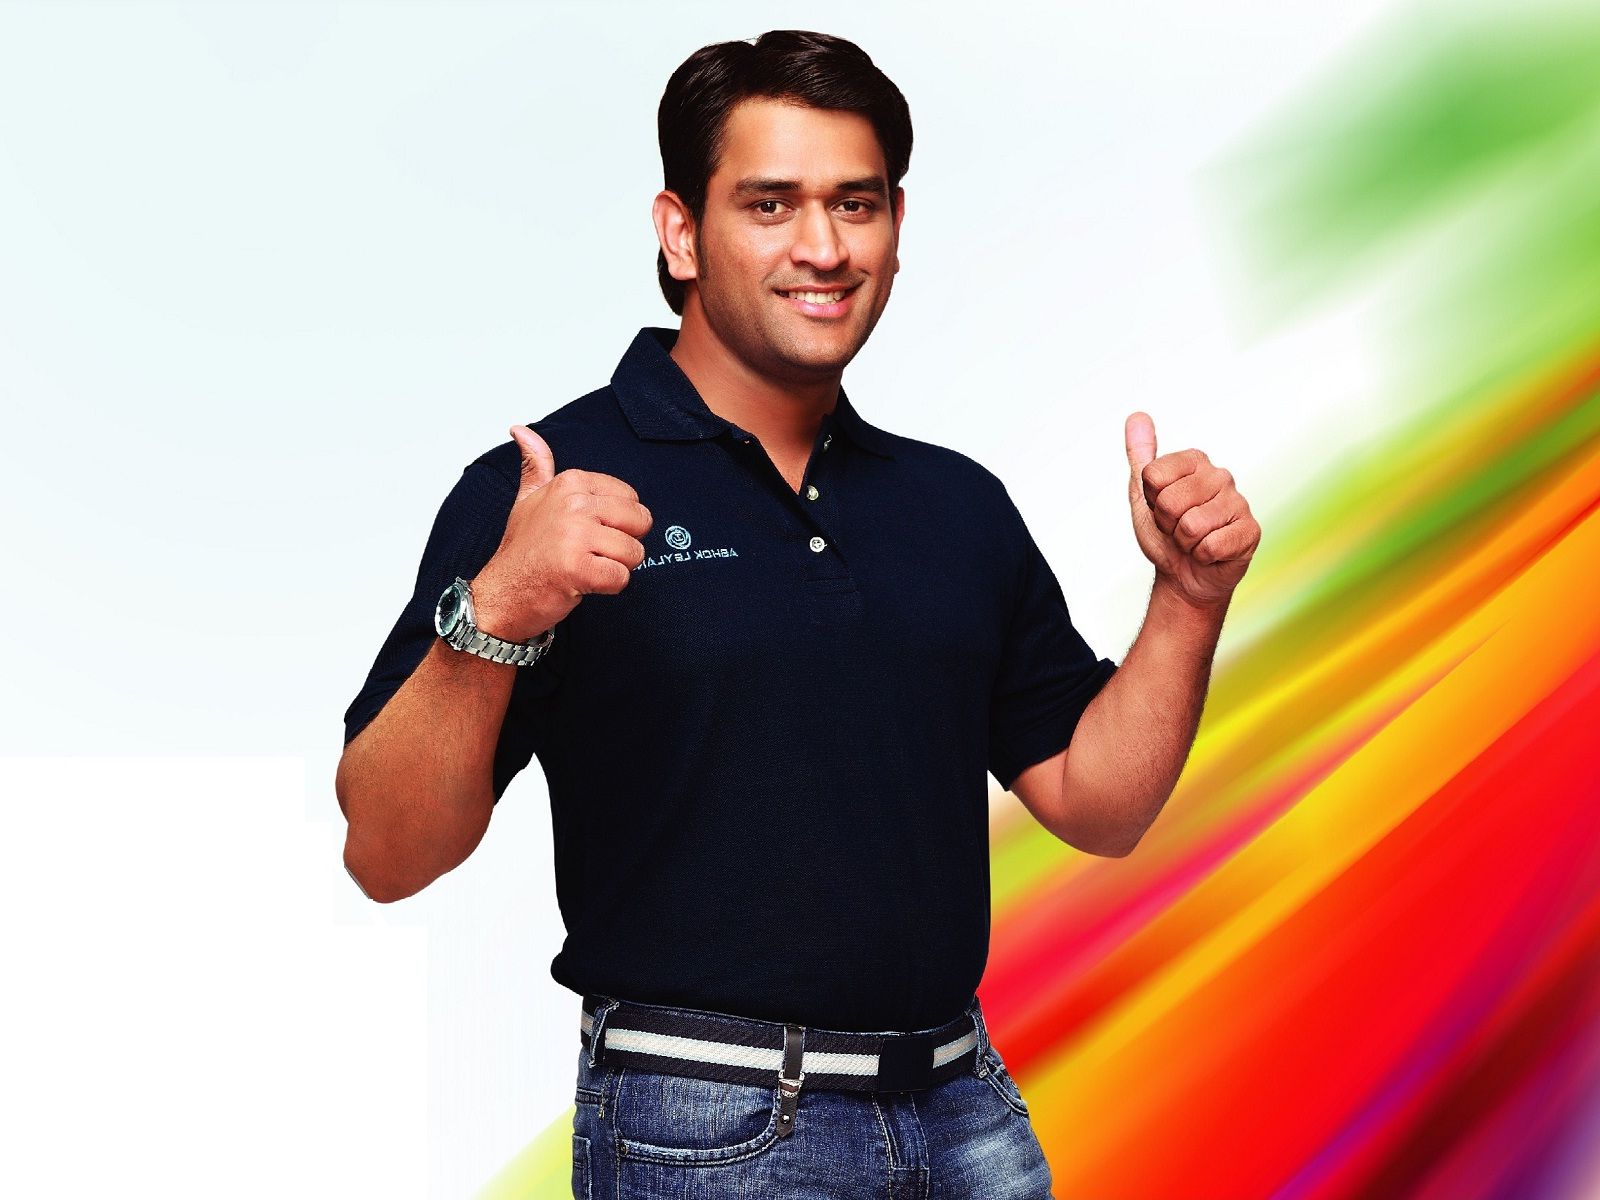 M S Dhoni Indian cricketer handsome looks HD Wallpapers Rocks